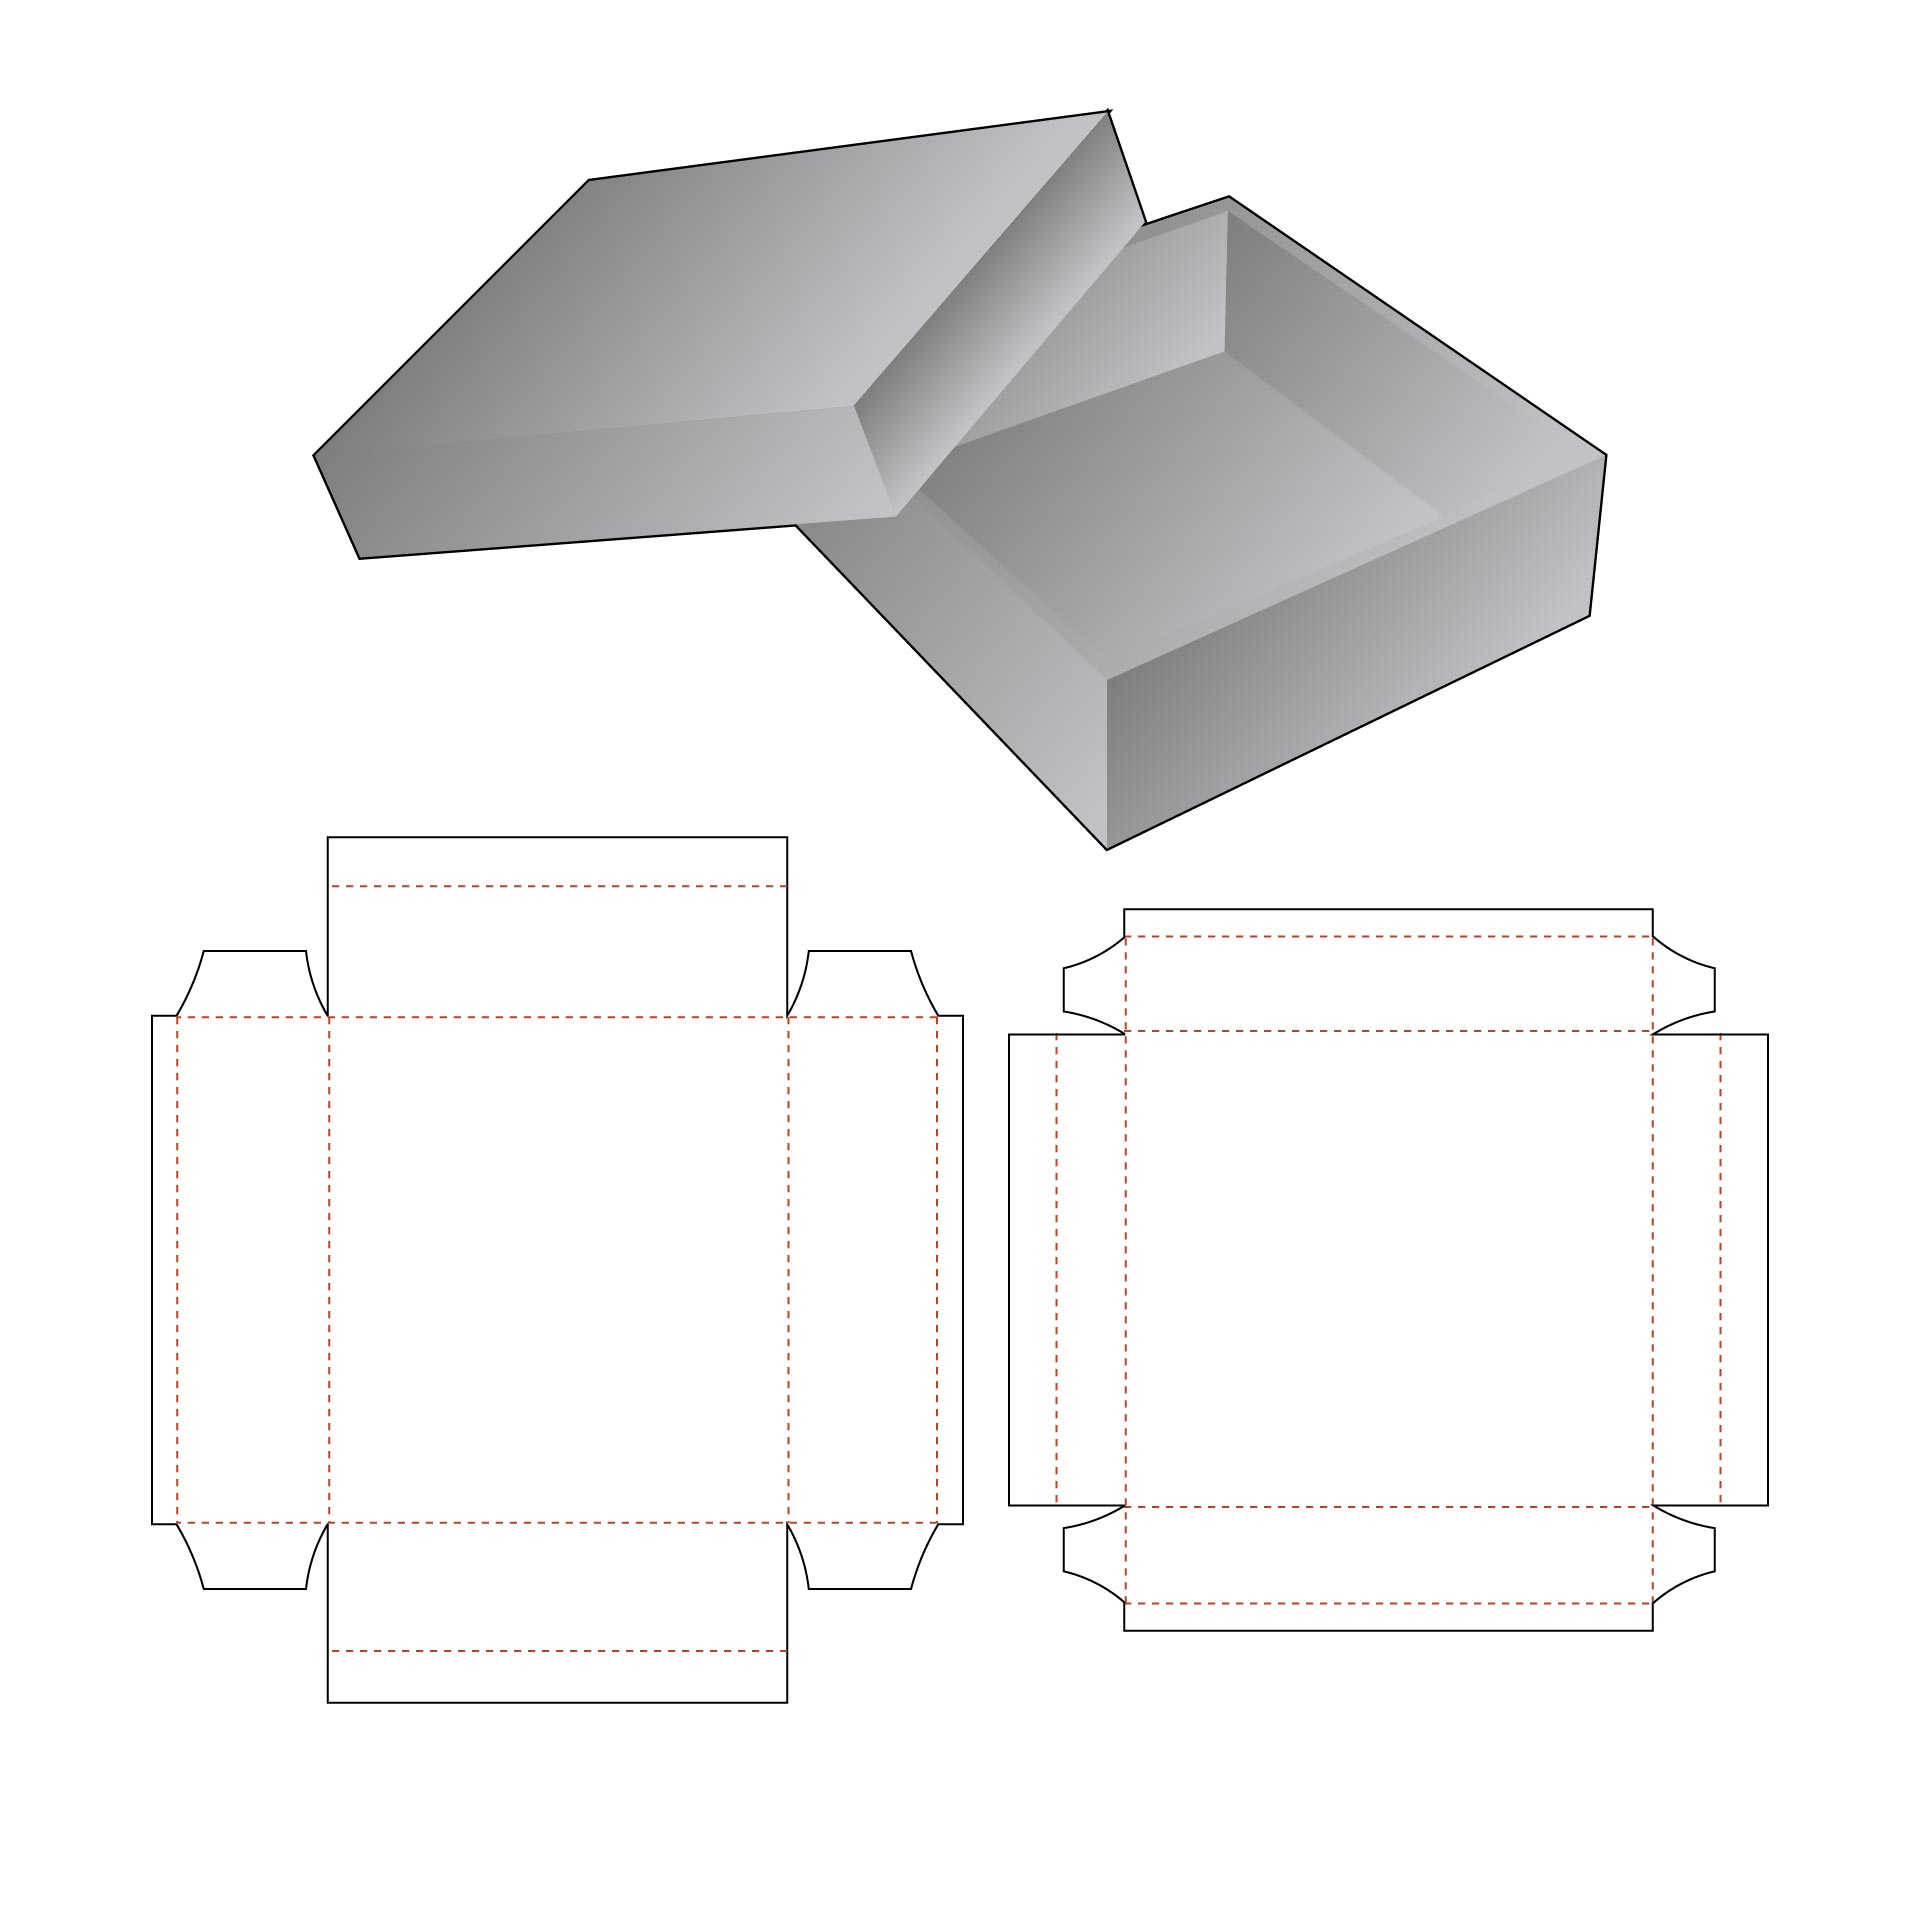 3D Printable Cube Template